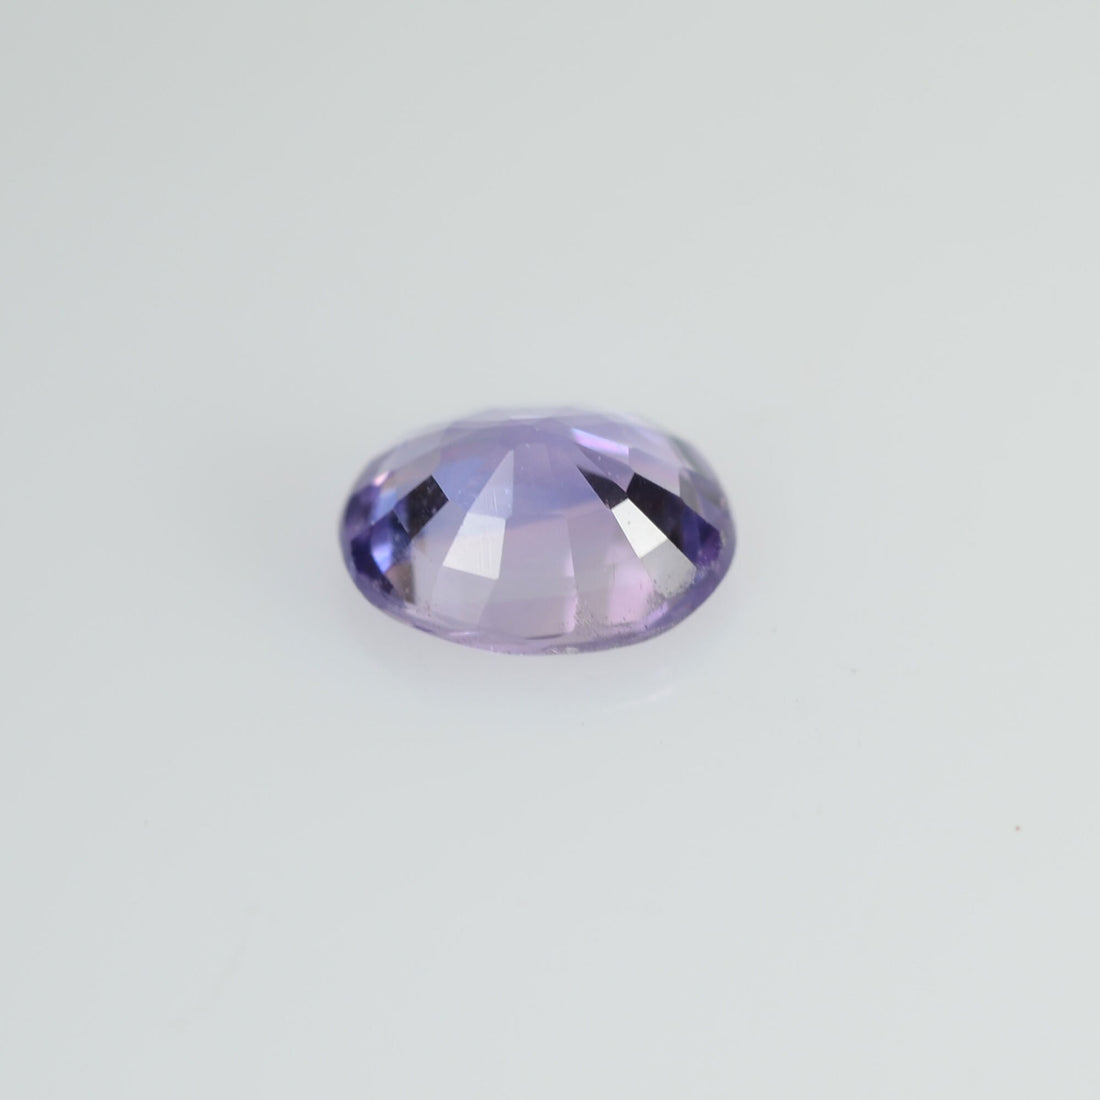 0.41 cts Natural Lavender Sapphire Loose Gemstone Oval Cut